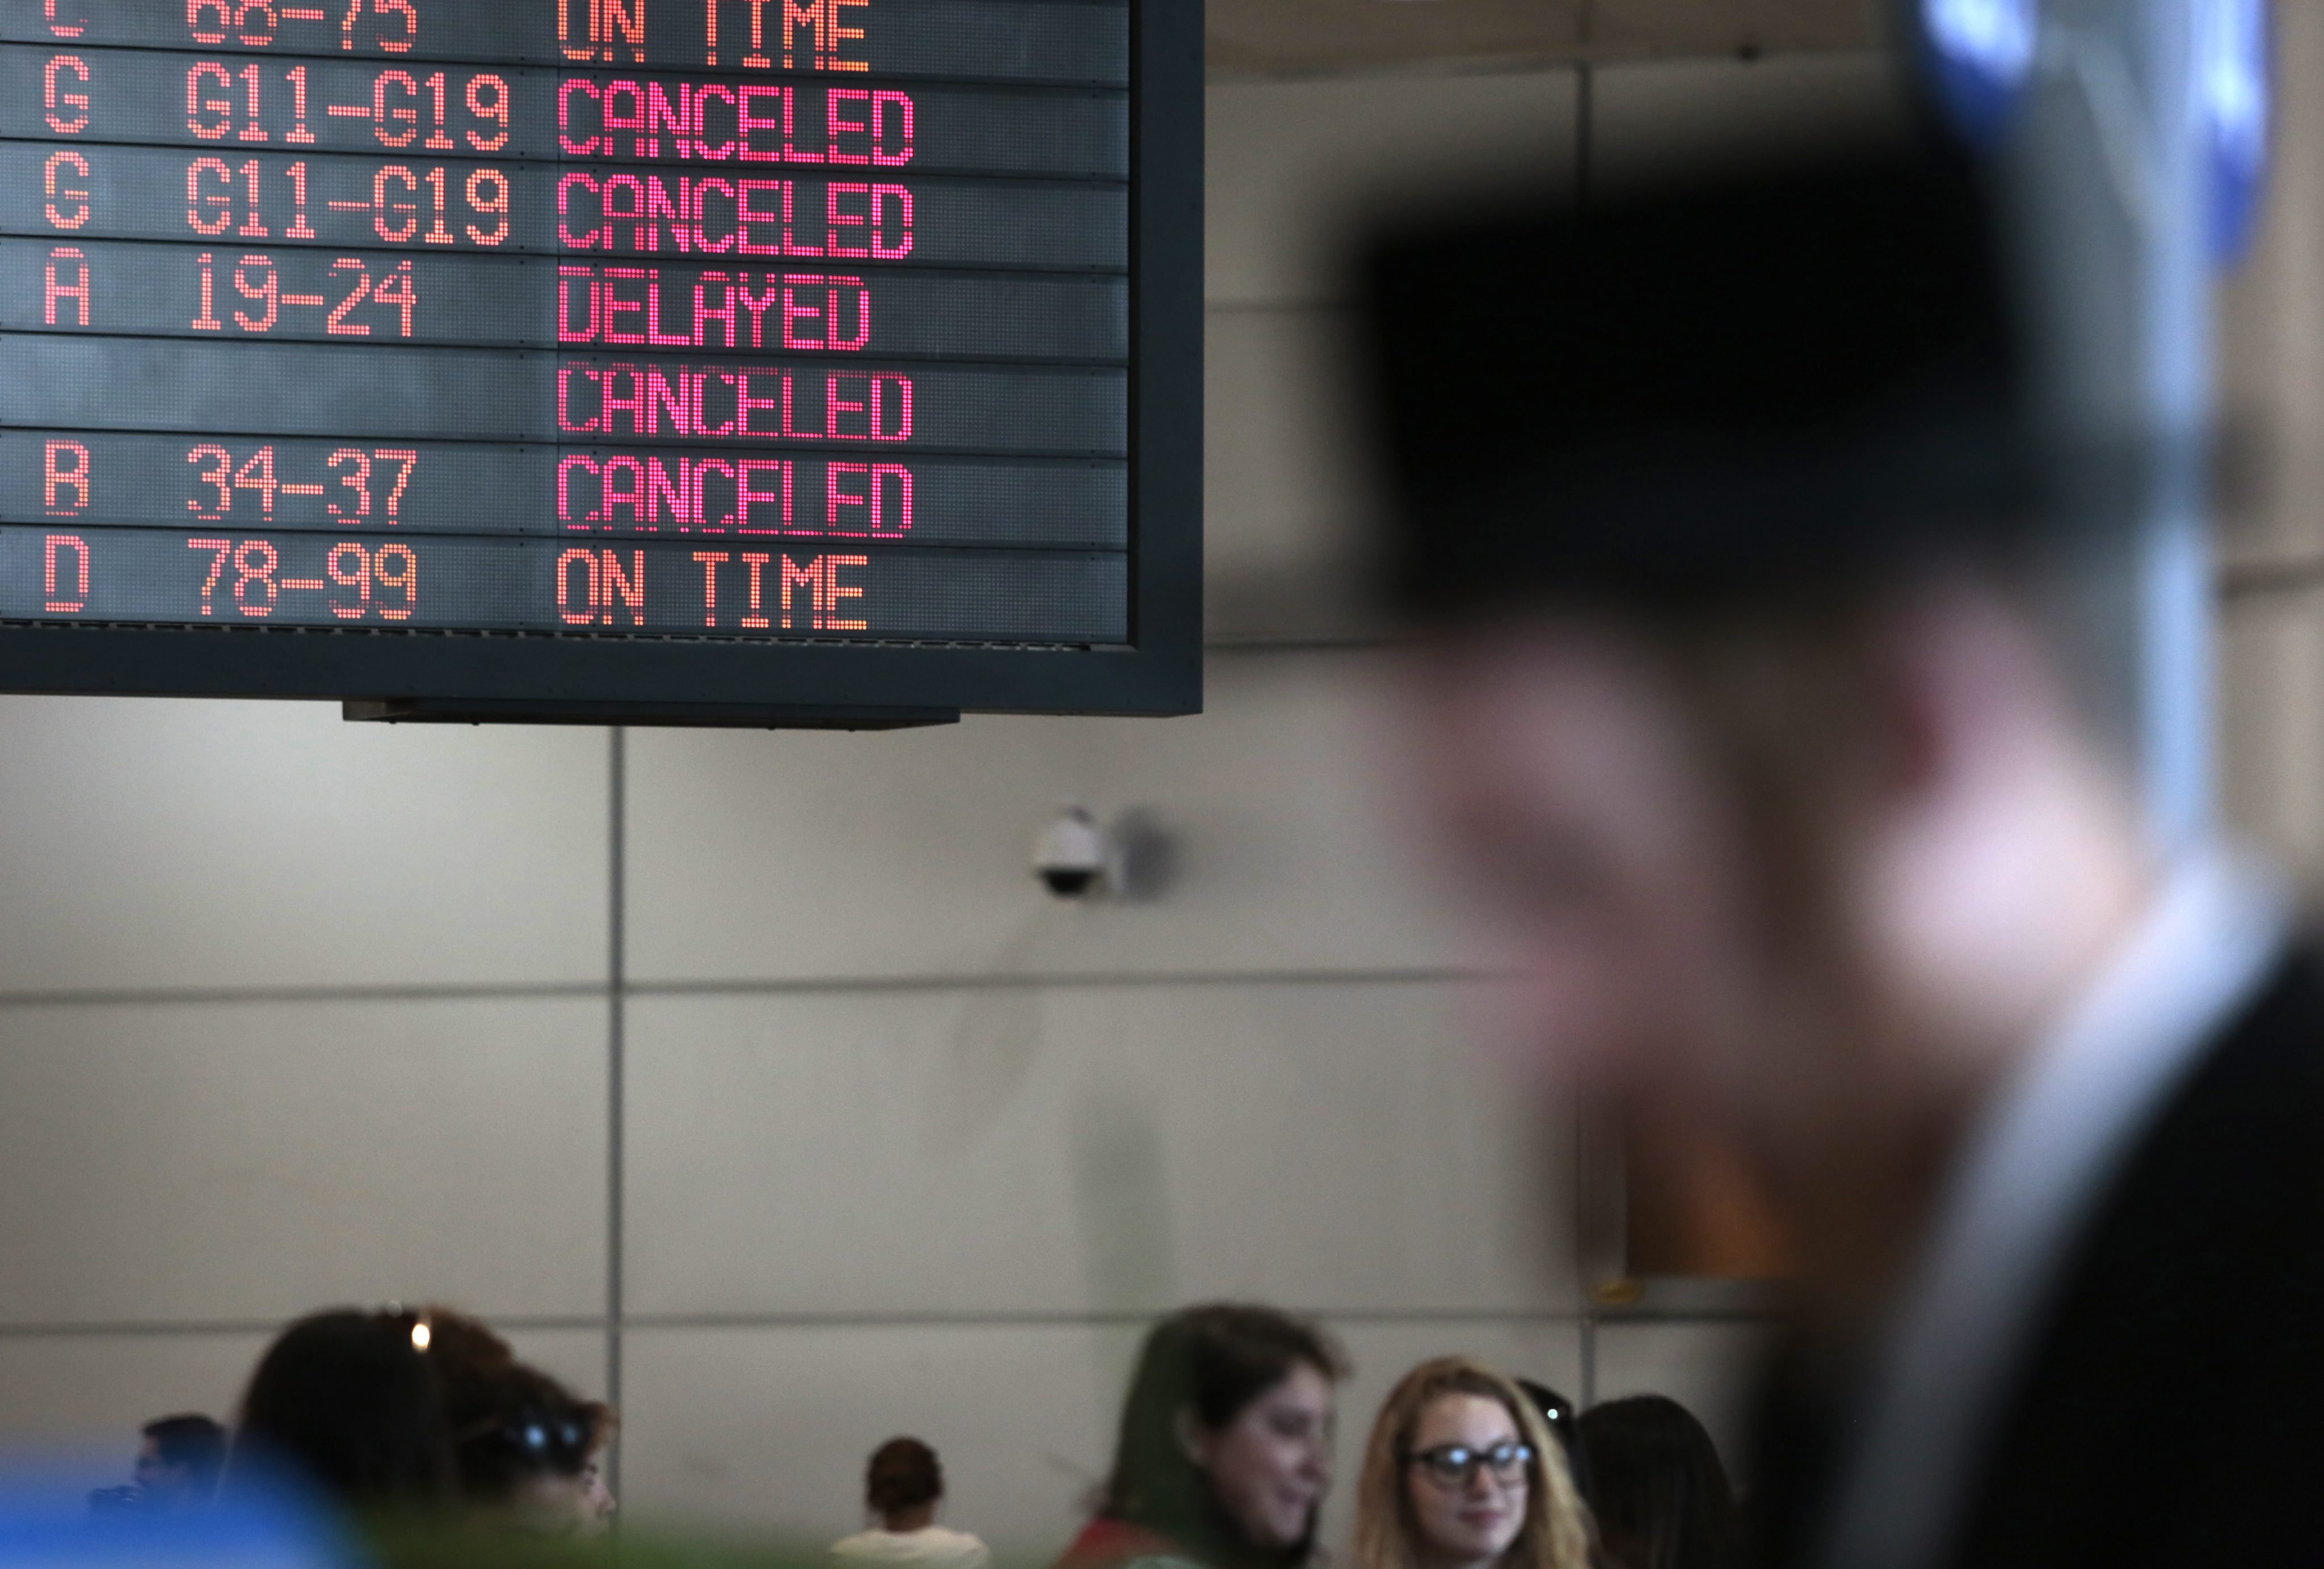 Cancelled fights shown on a departure board in Ben Gurion Airport in Lod, just outside Tel Aviv, Israel on July 23, 2014.